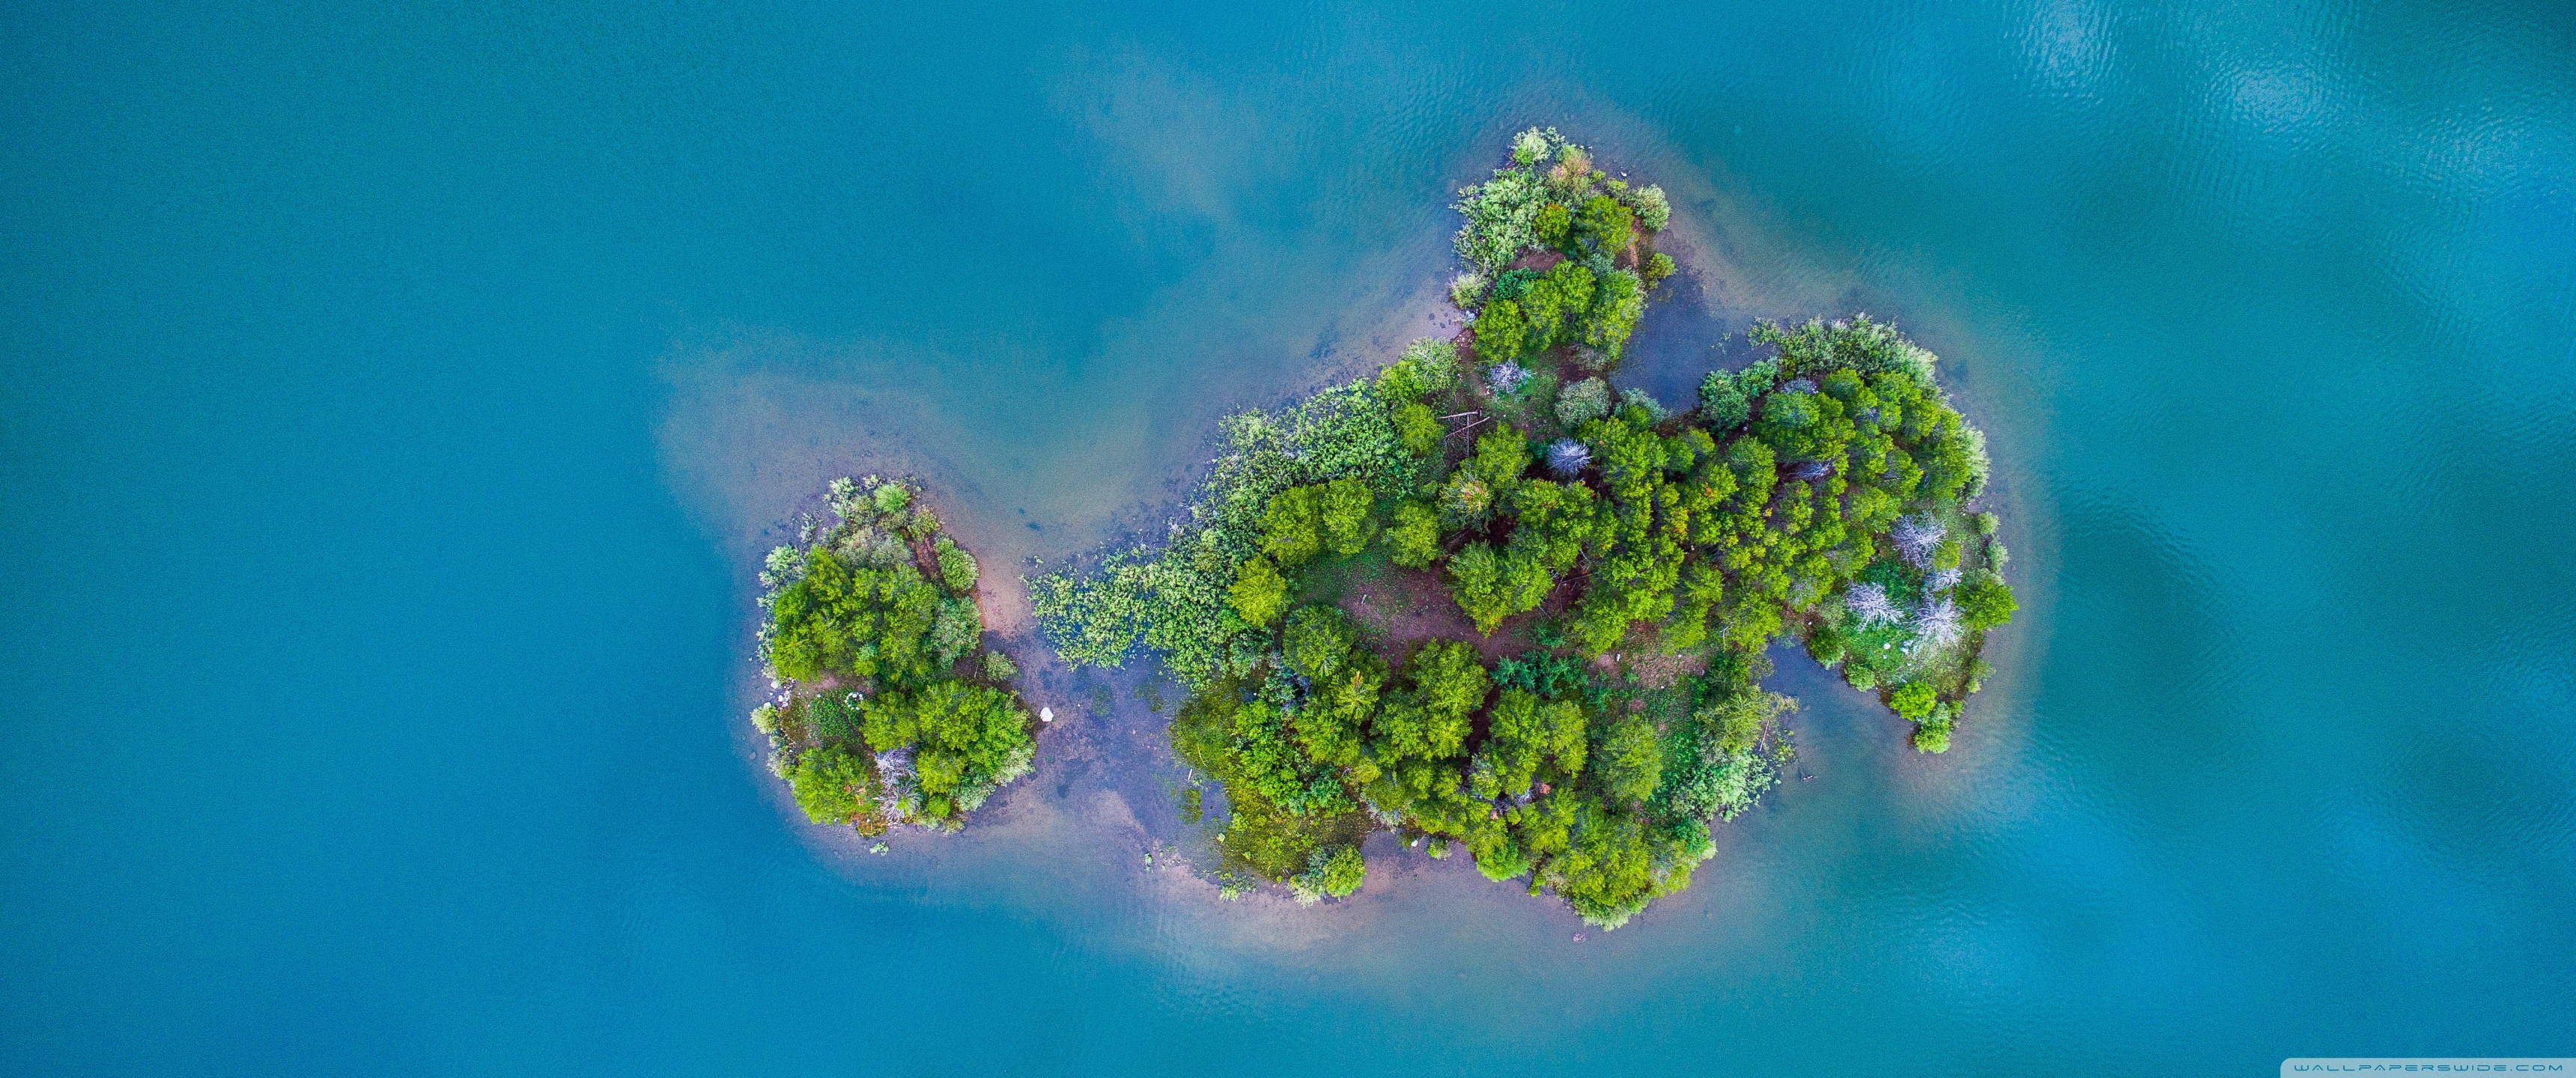 tiny_island_blue_water_aerial_view_photography-wallpaper-3440x1440.jpg